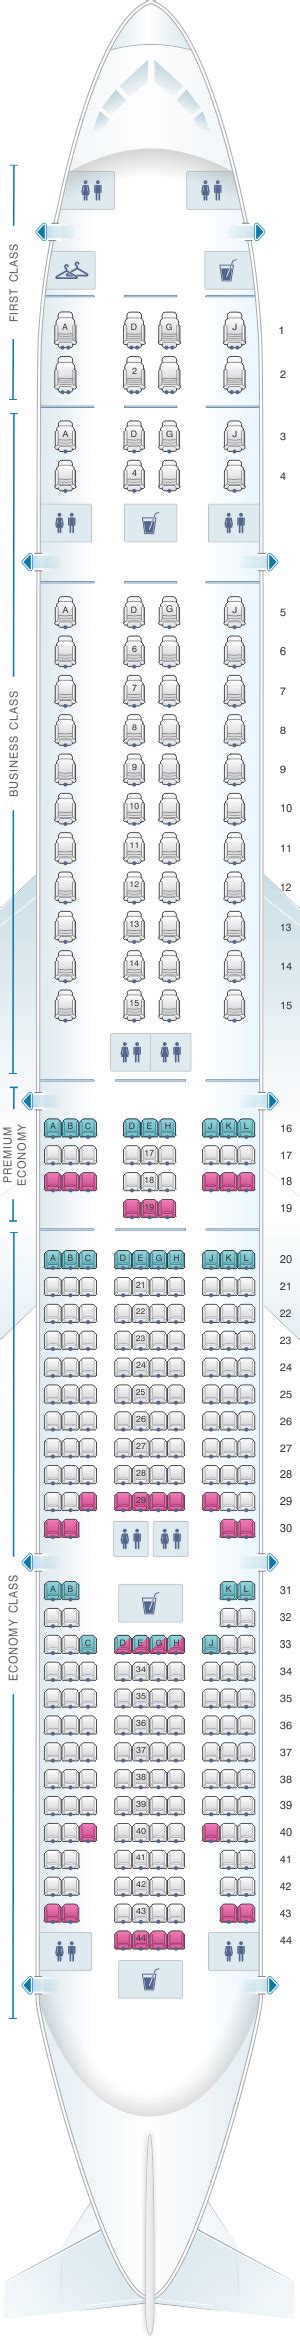 Contact information for aktienfakten.de - 43G. this seat may have limited recline. this seat is near the galley. 44G. this seat has extra legroom. no underseat stowage. no under-seat stowage during takeoff and landing. traytable in armrest means narrower seat. 33E.